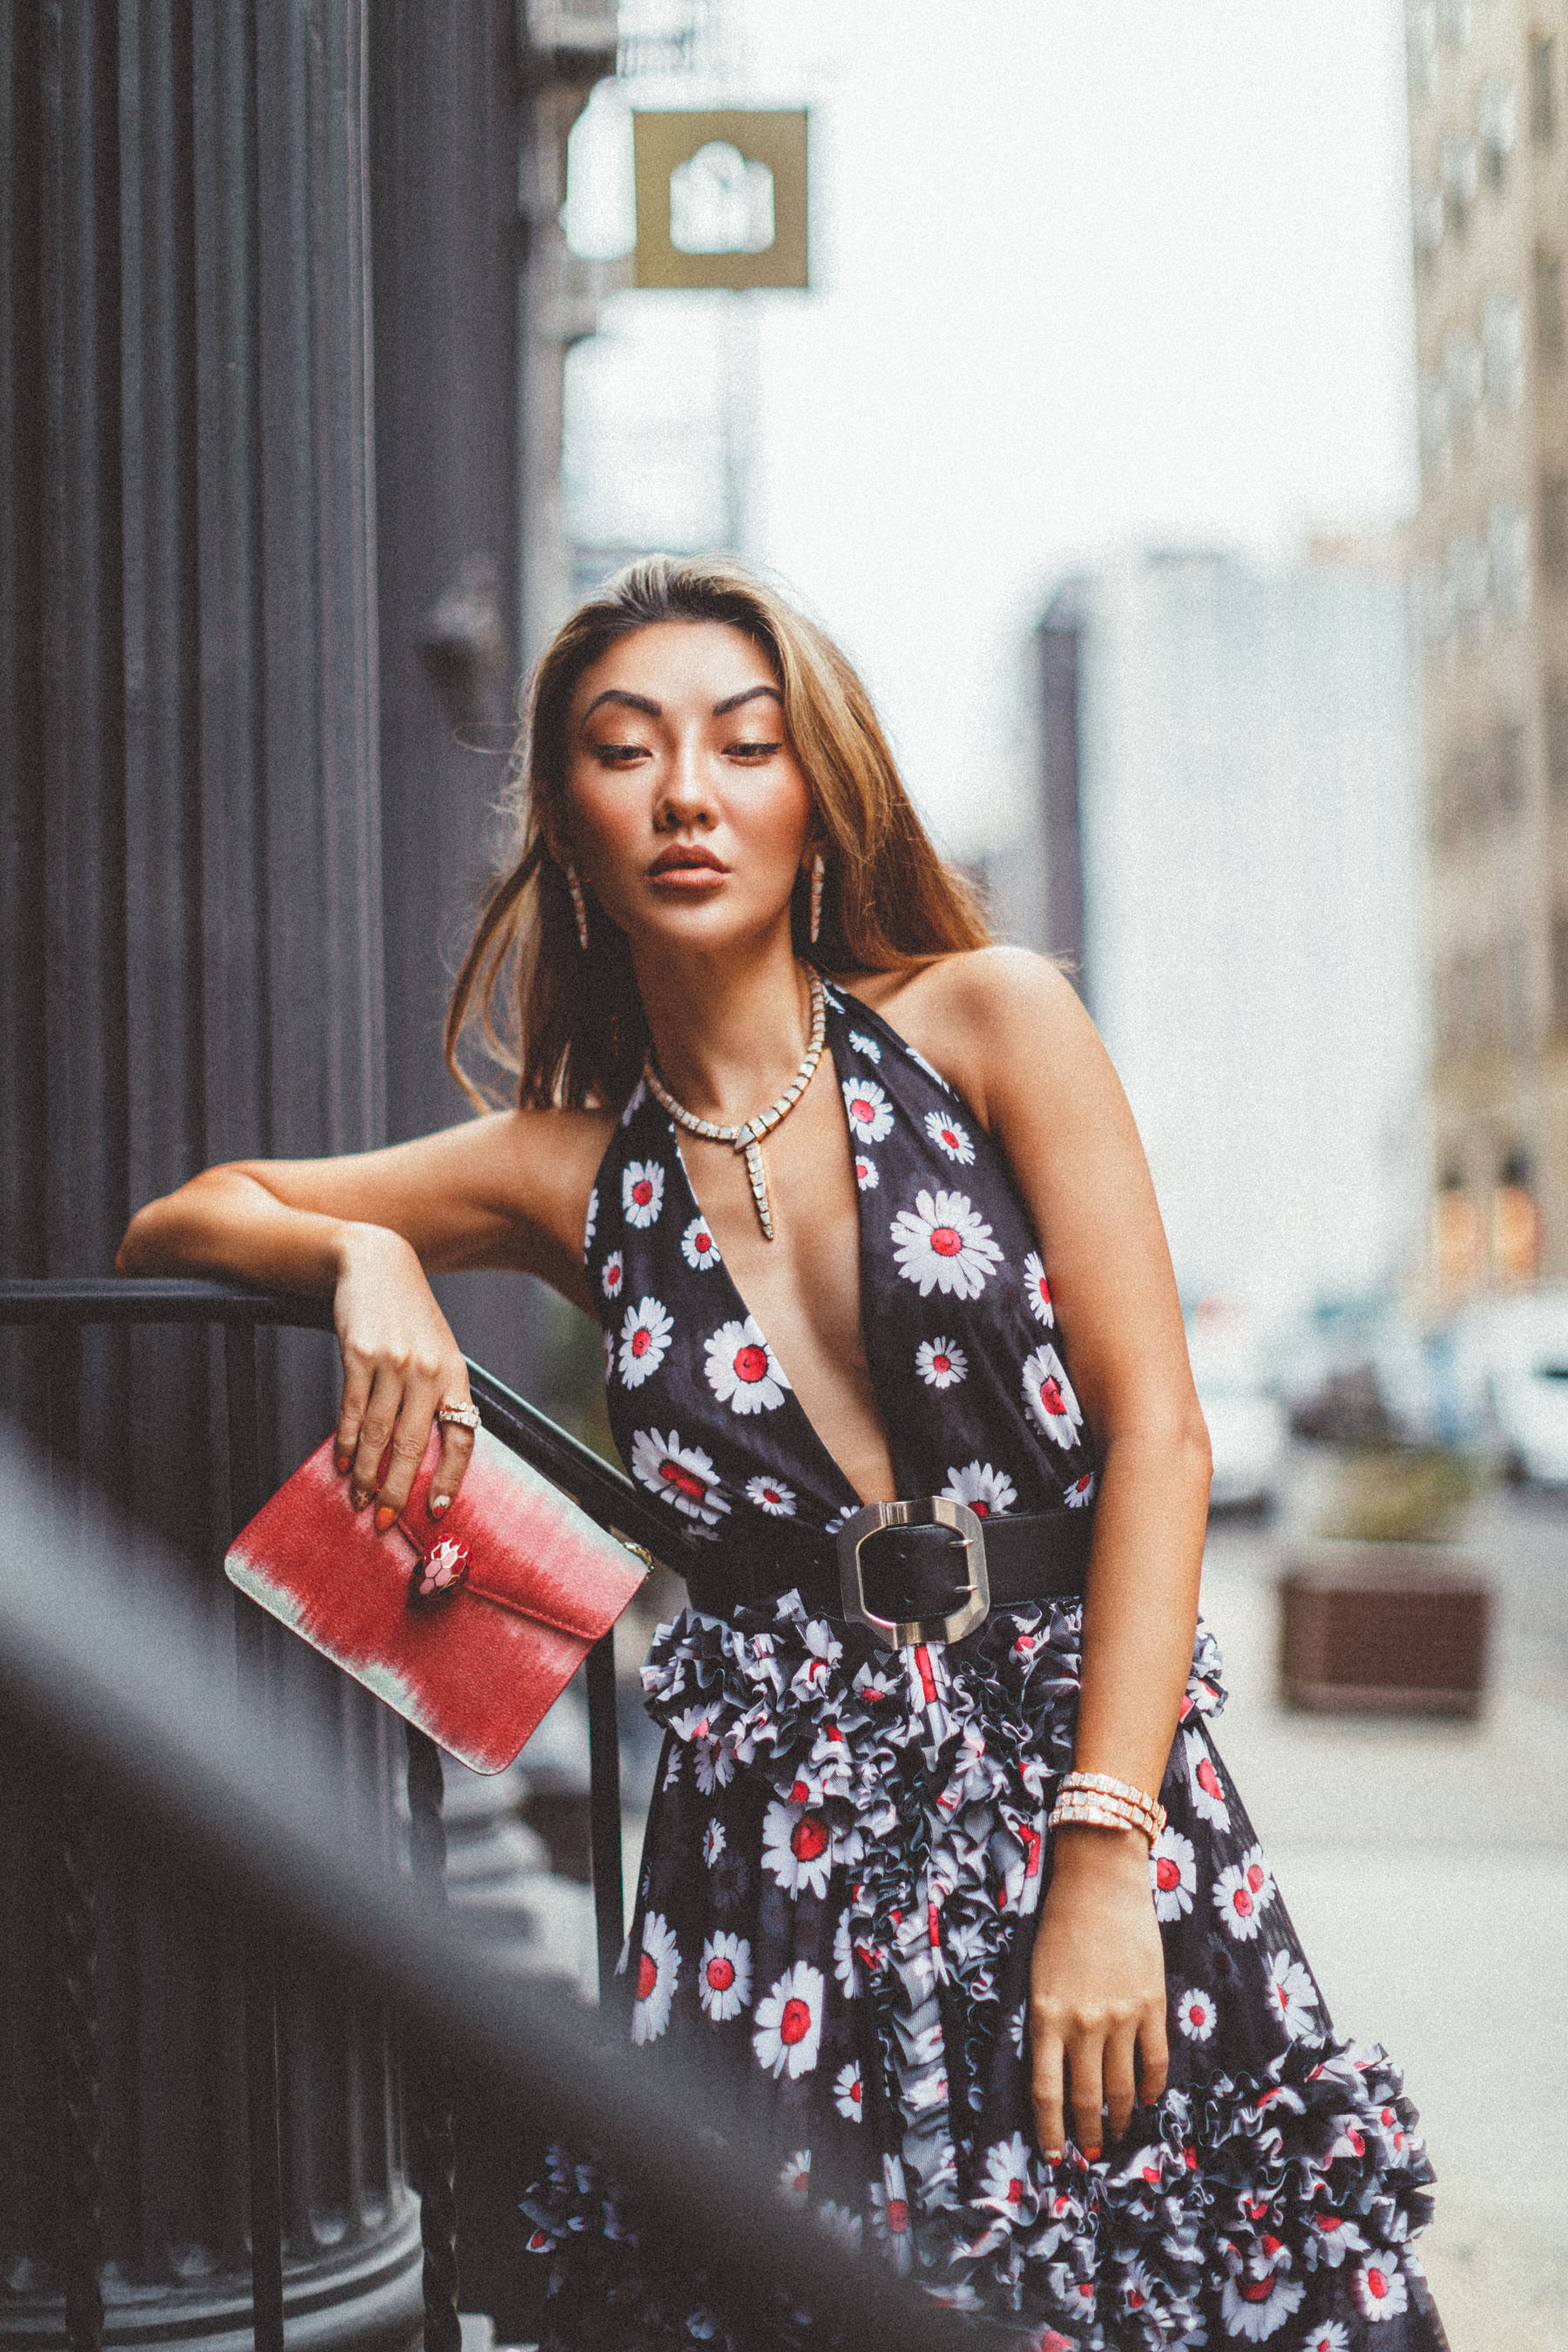 outfit mistakes, bulgari jewelry, floral dress // Notjessfashion.com